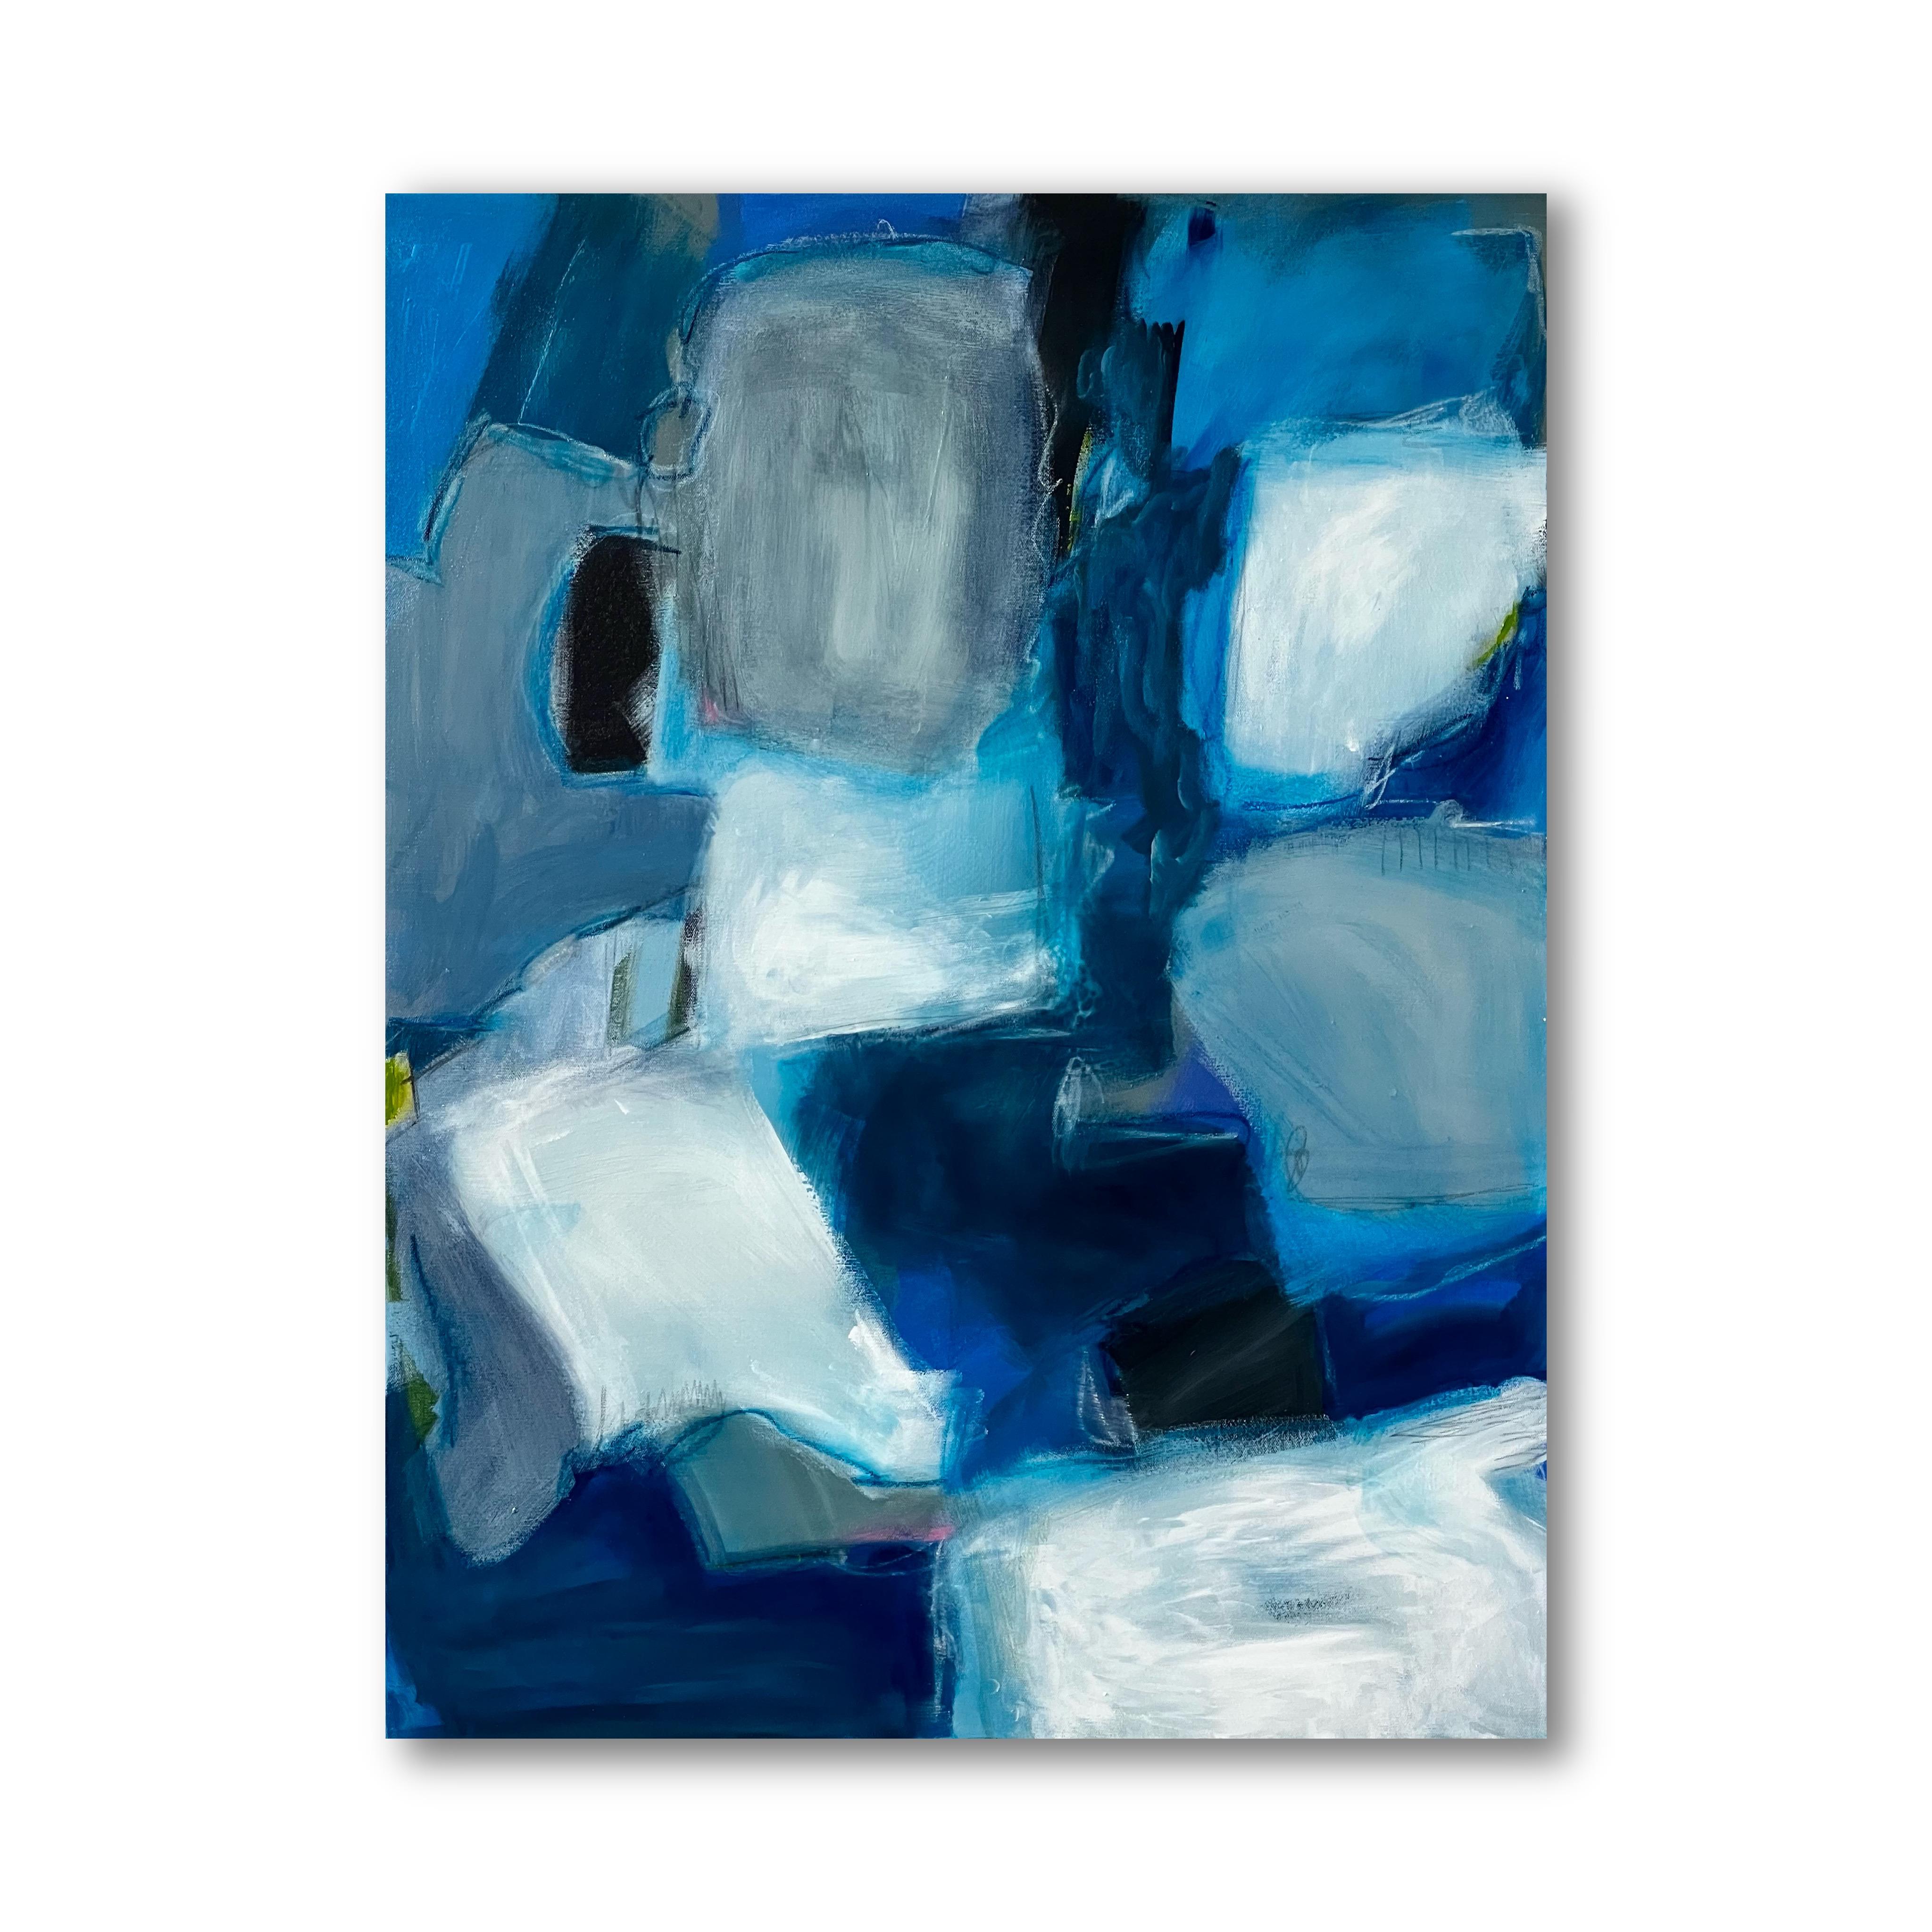 Deep Thoughts (Abstract, Blues, Blue Hues, Light Blue, Navy Blue, Glowing) - Painting by Kelley Carman